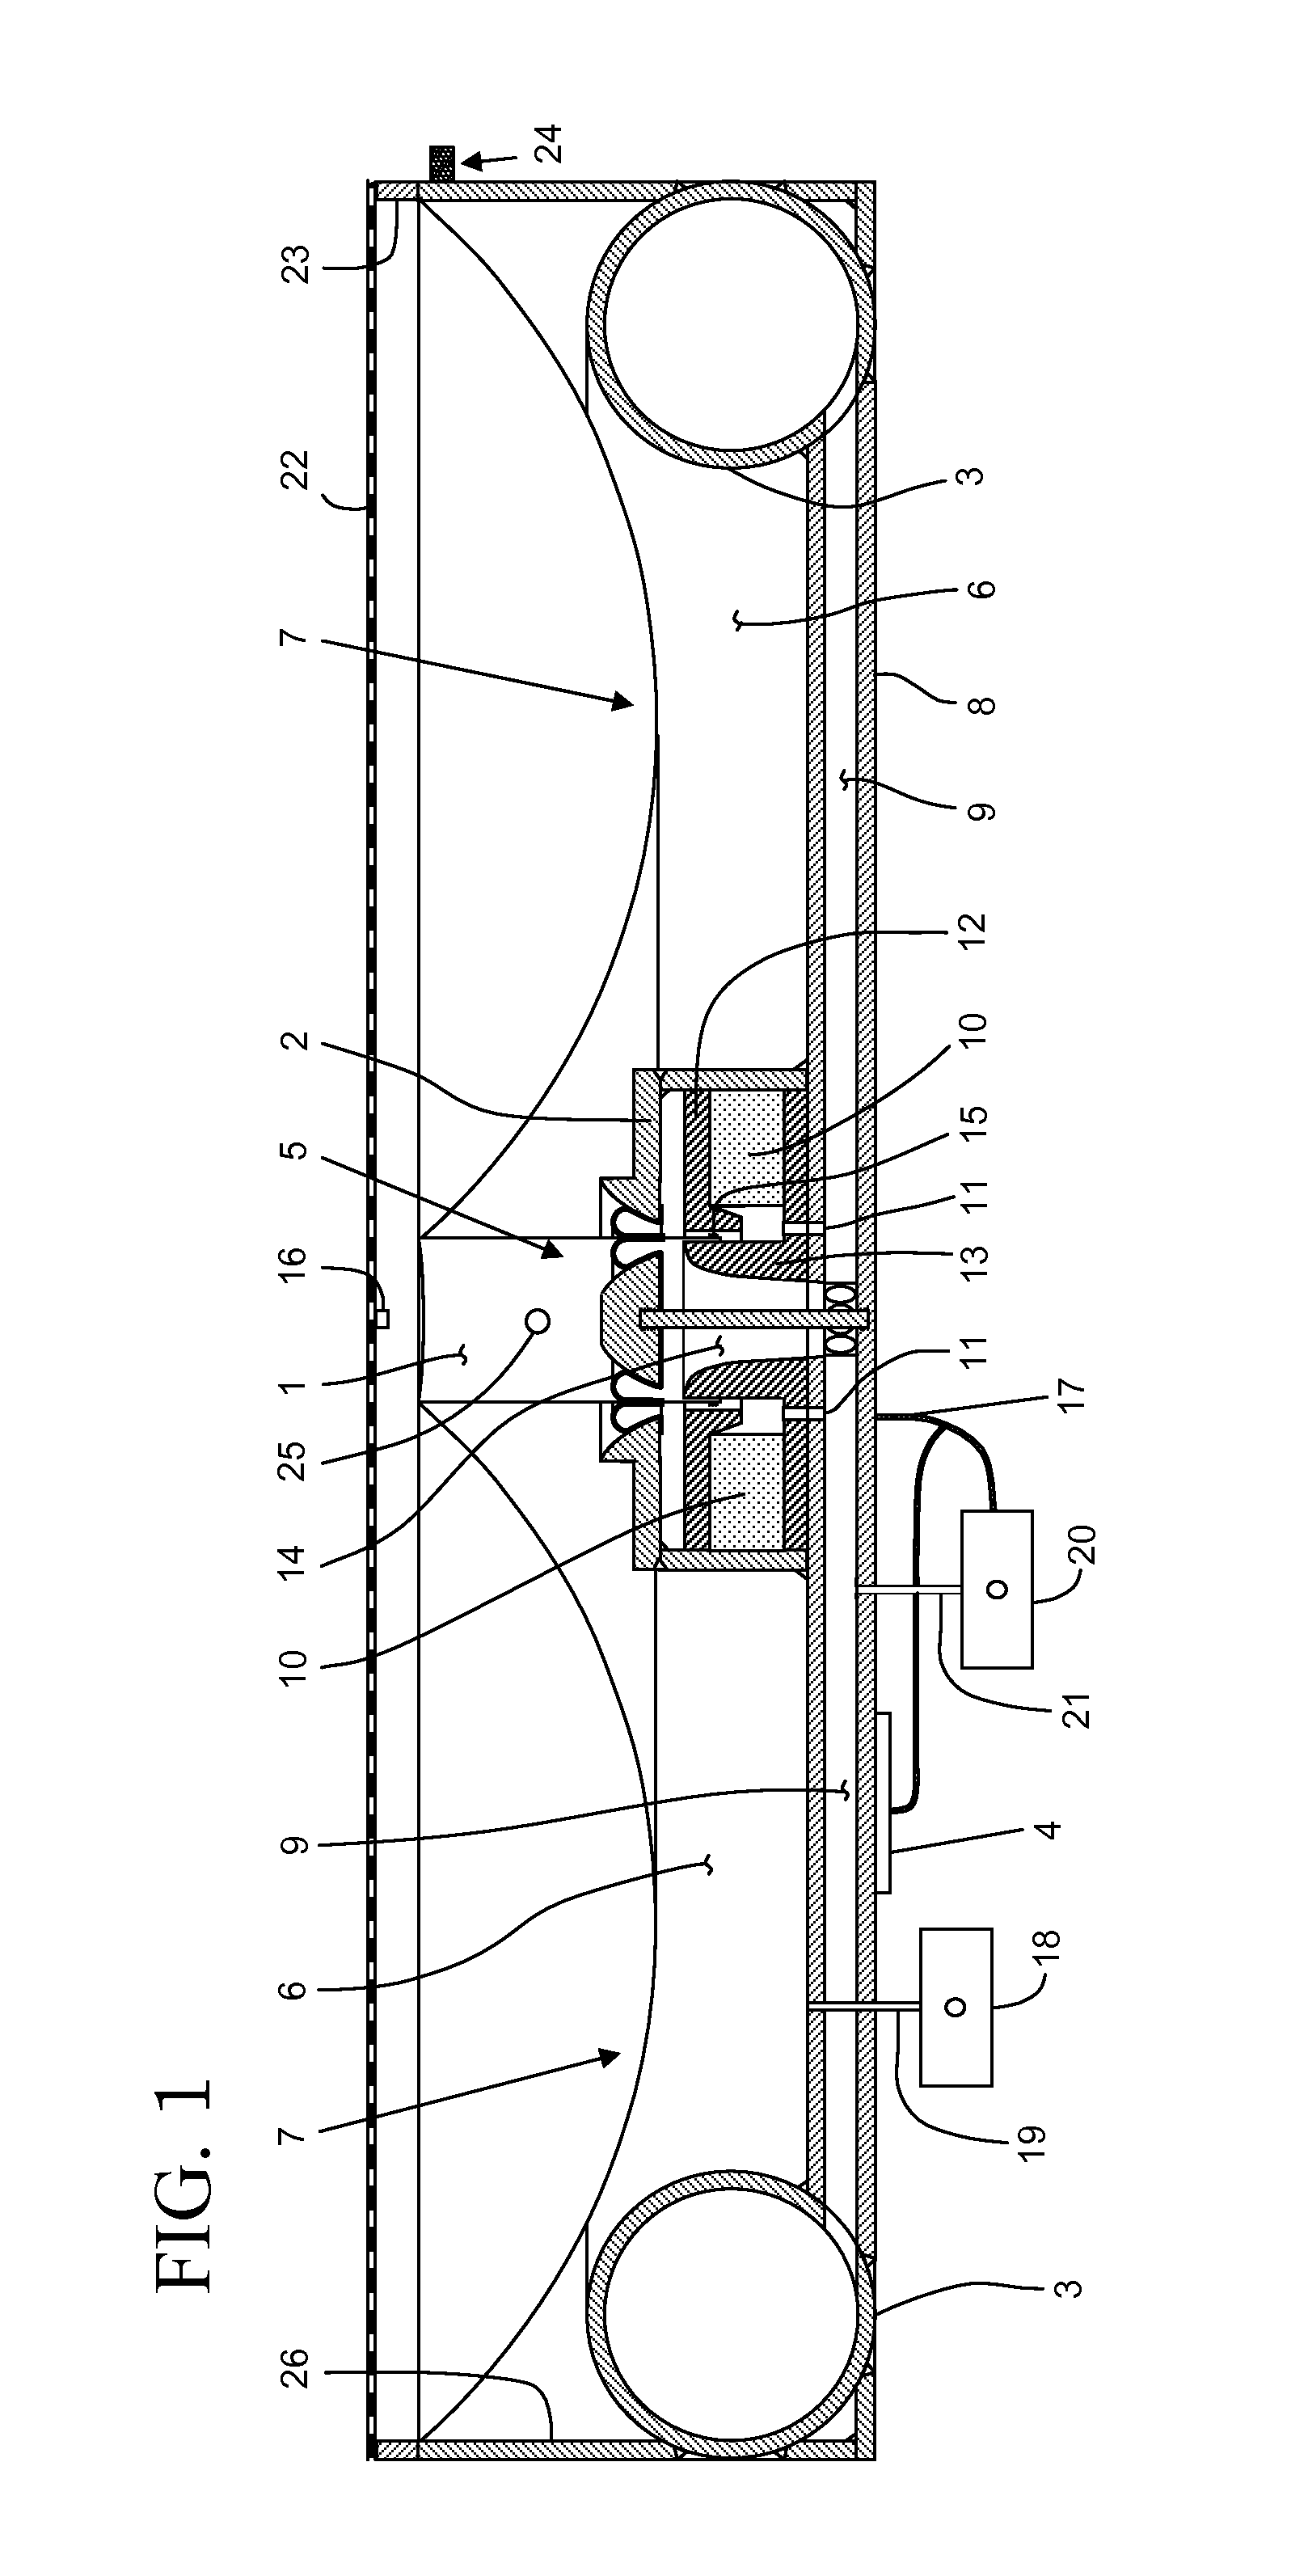 Acoustic actuator and passive attenuator incorporating a lightweight acoustic diaphragm with an ultra low resonant frequency coupled with a shallow enclosure of small volume